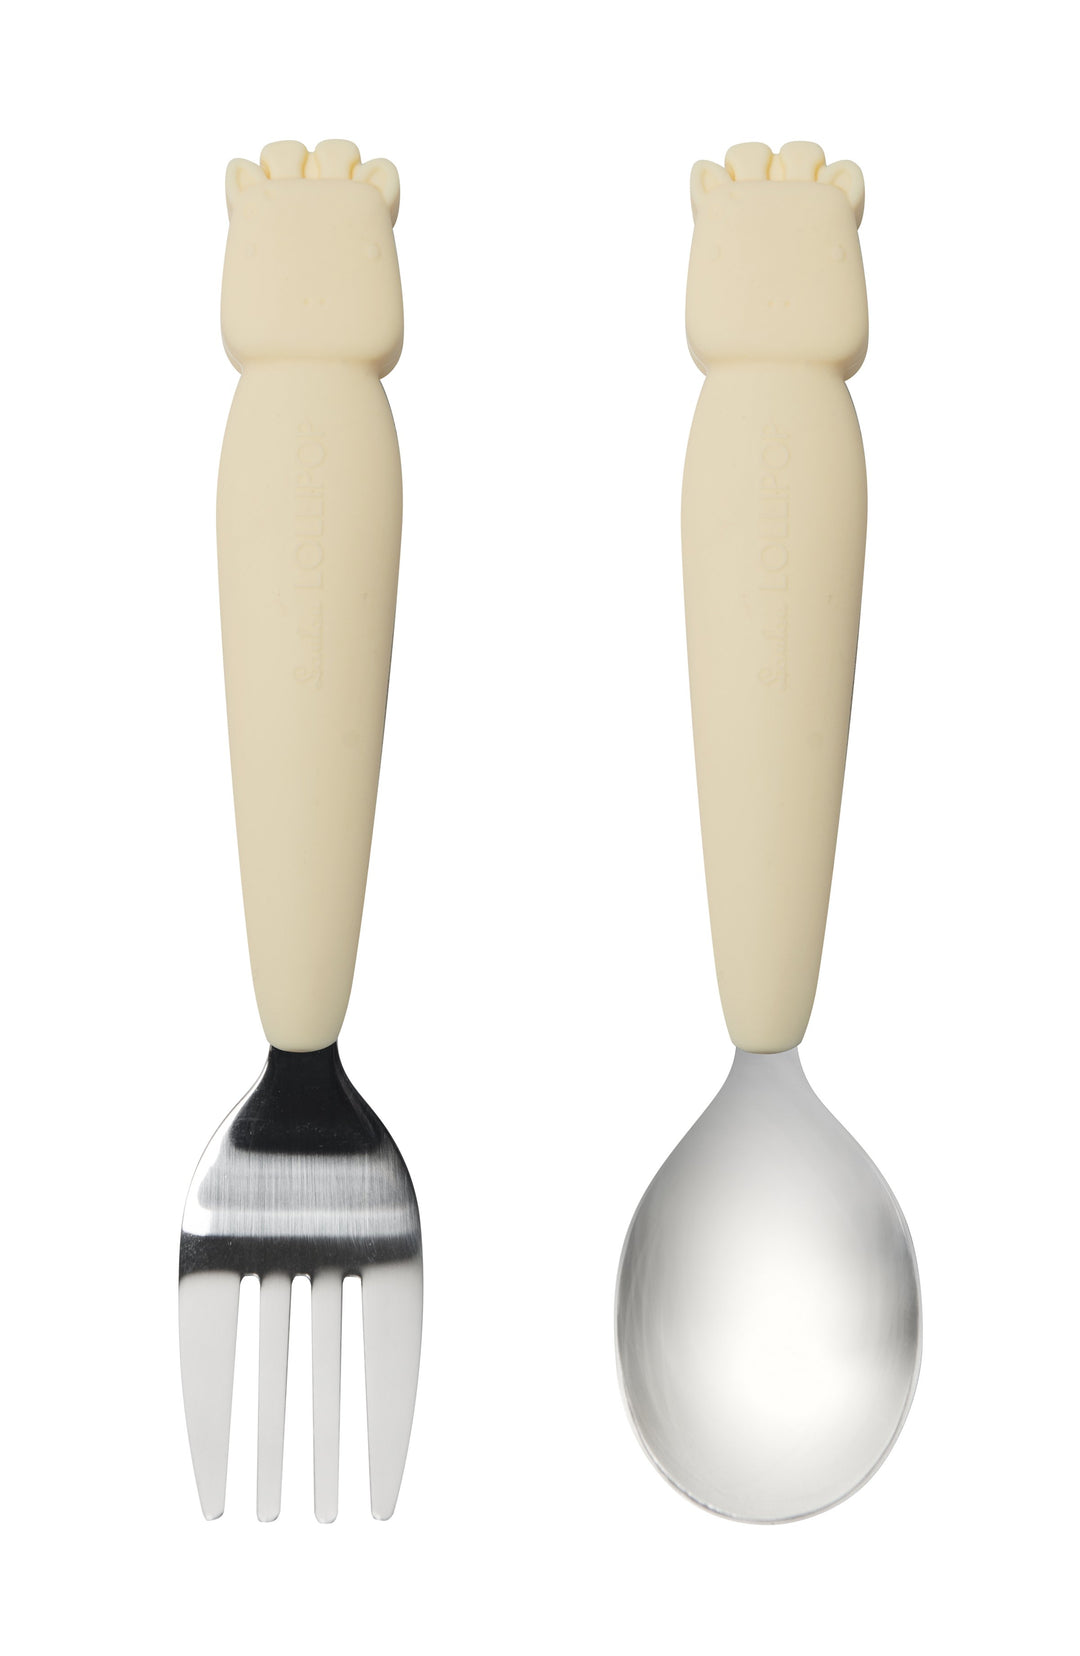 LouLou Lollipop Big Kid's Silicone Spoon/Fork Set